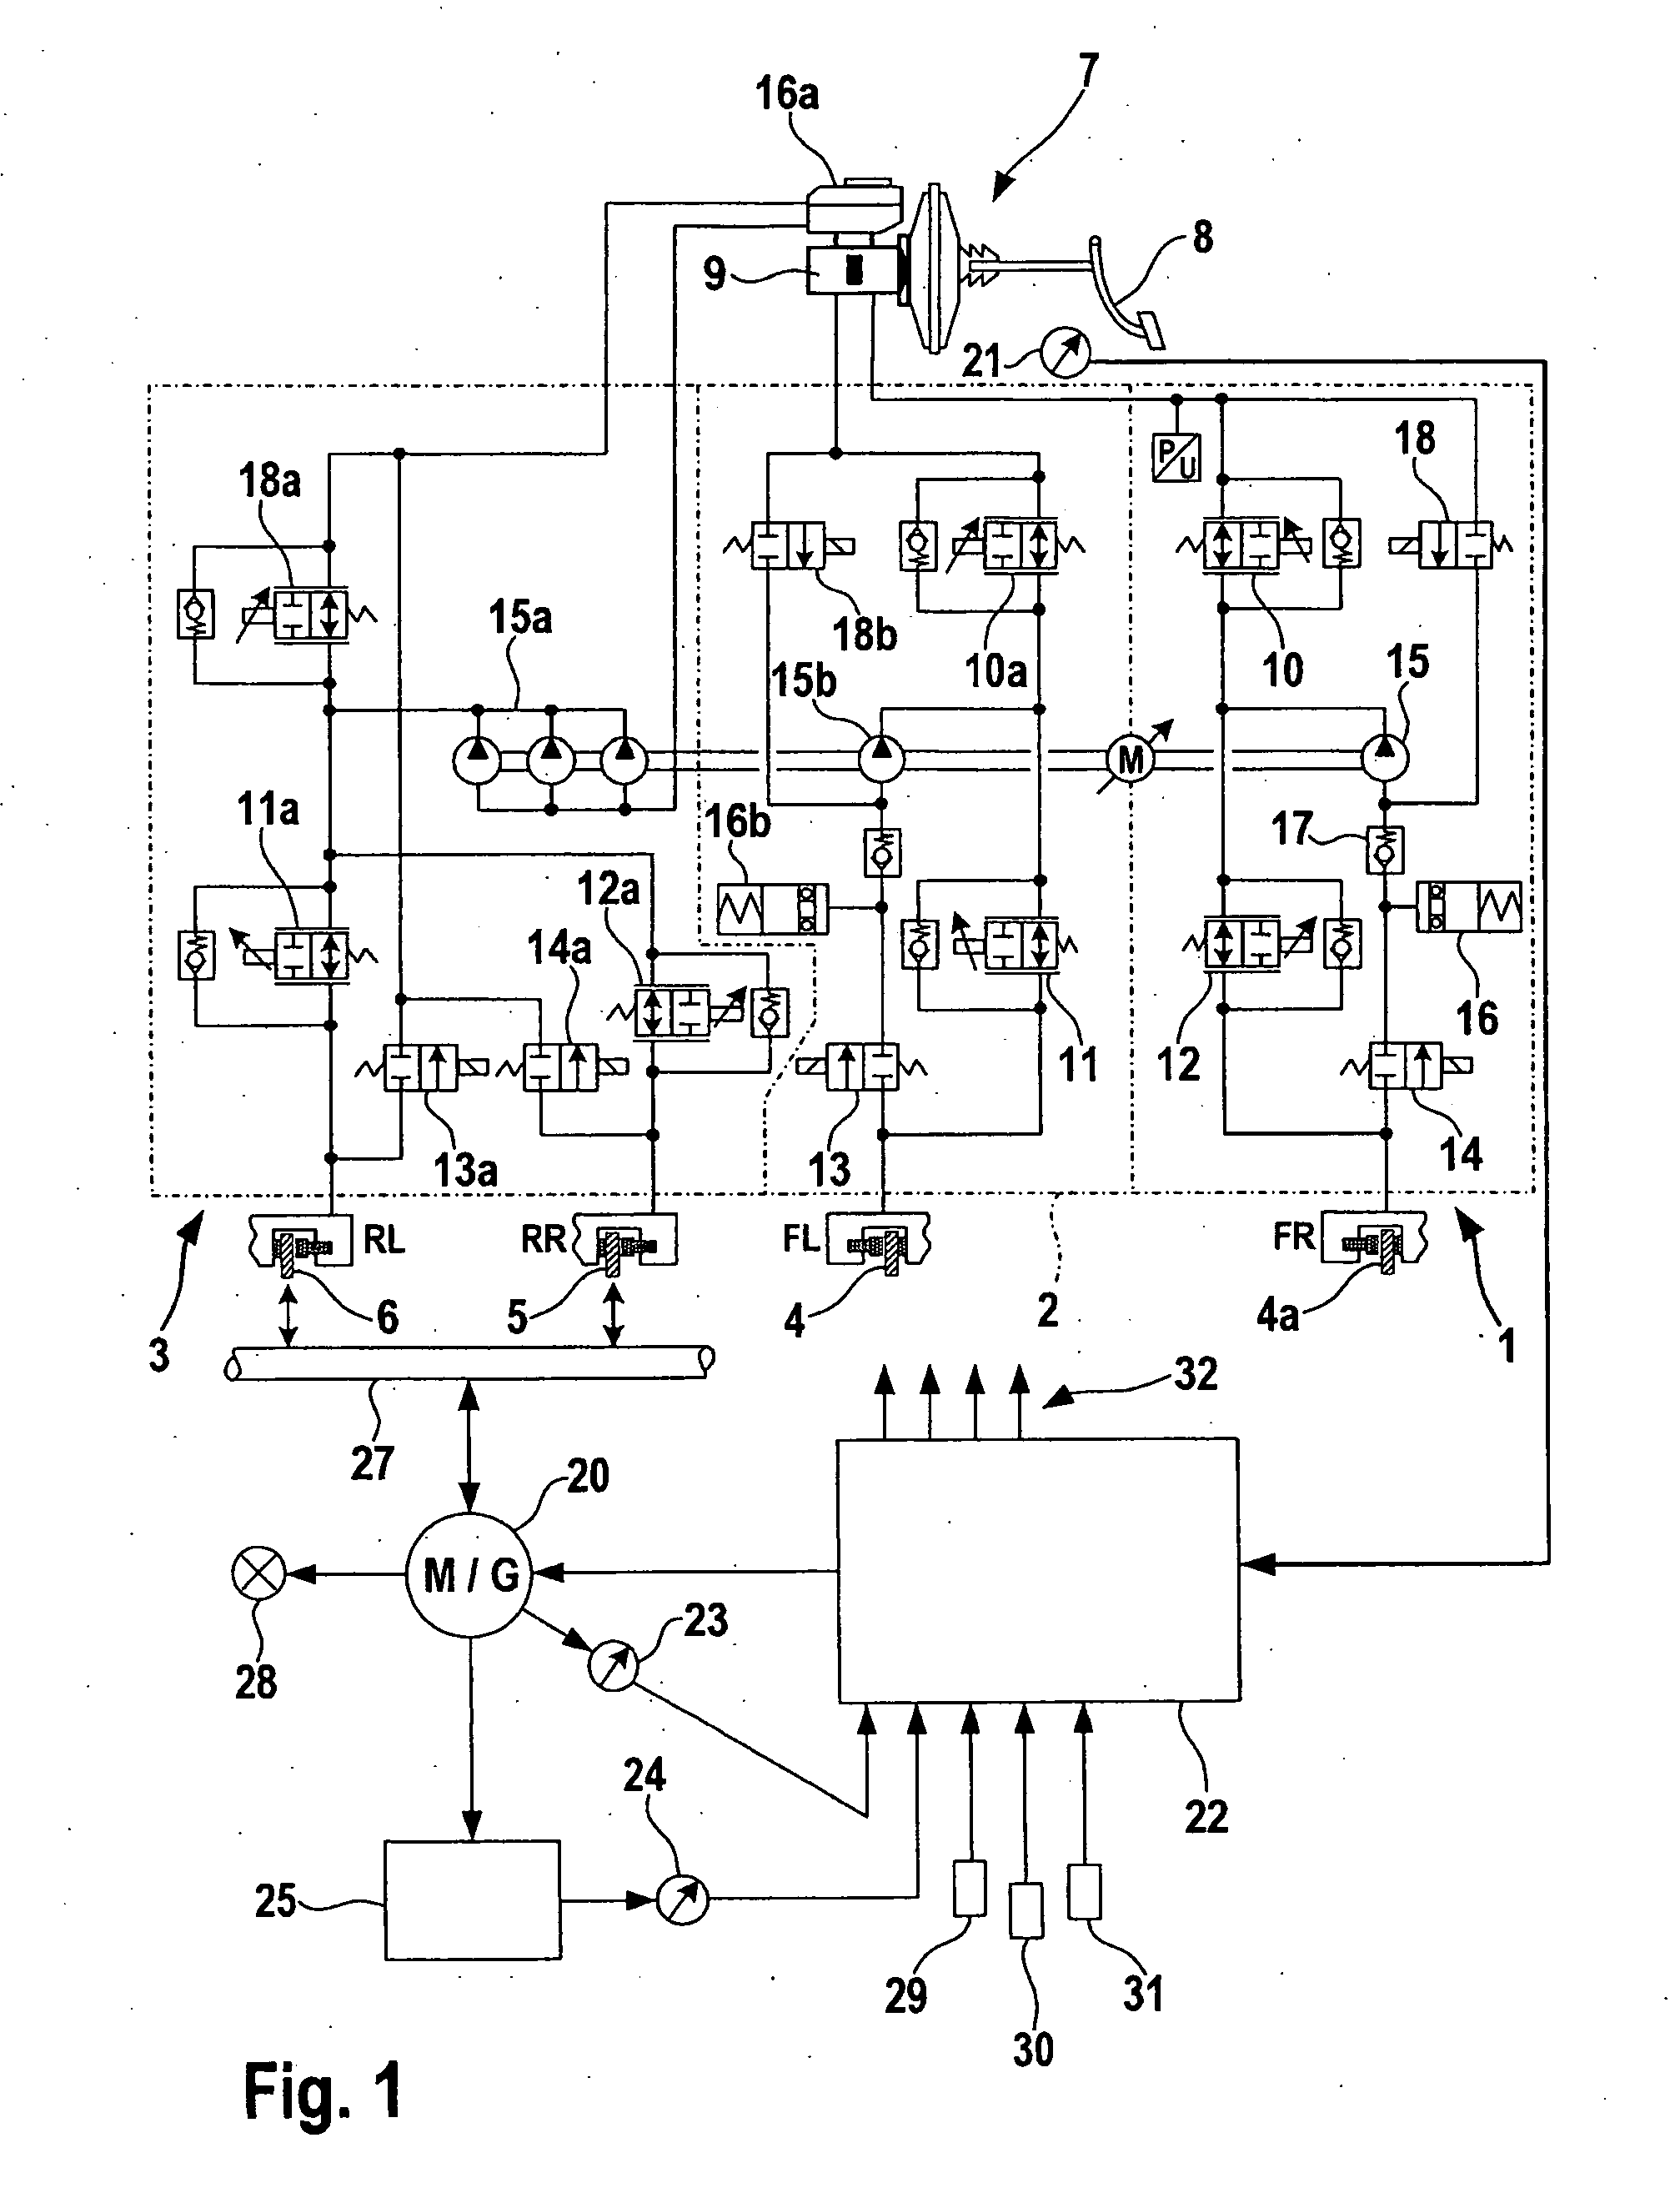 Brake device for a motor vehicle having at least three brake circuits